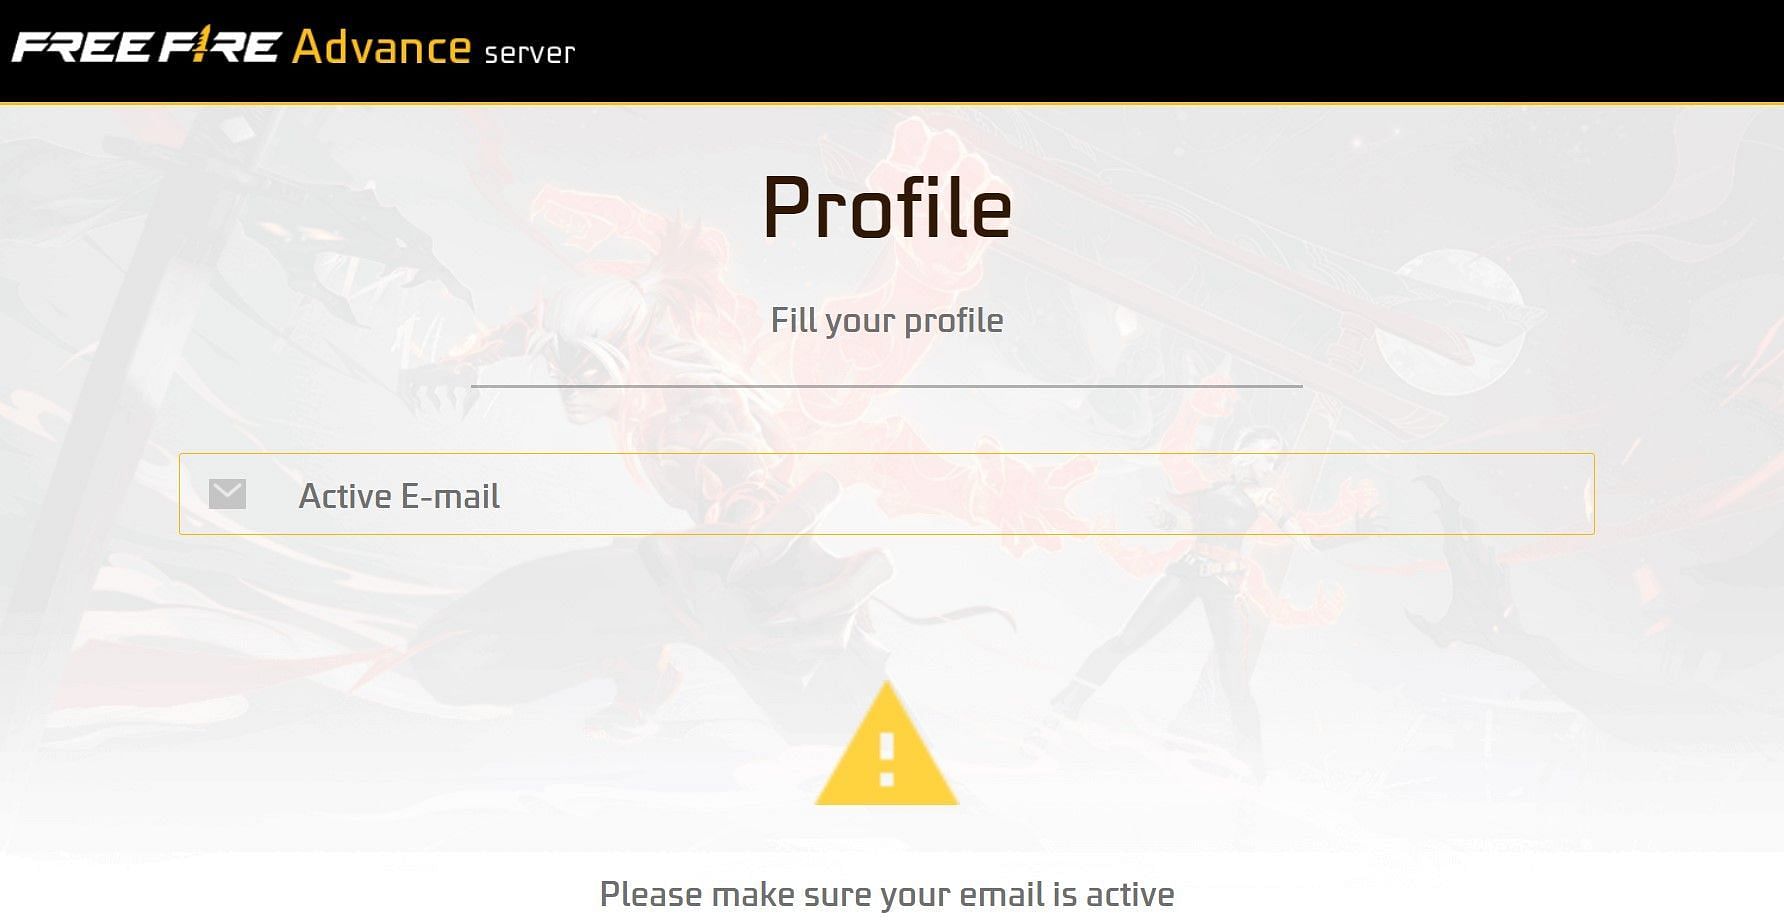 Enter the email address into the text field (Image via Garena)